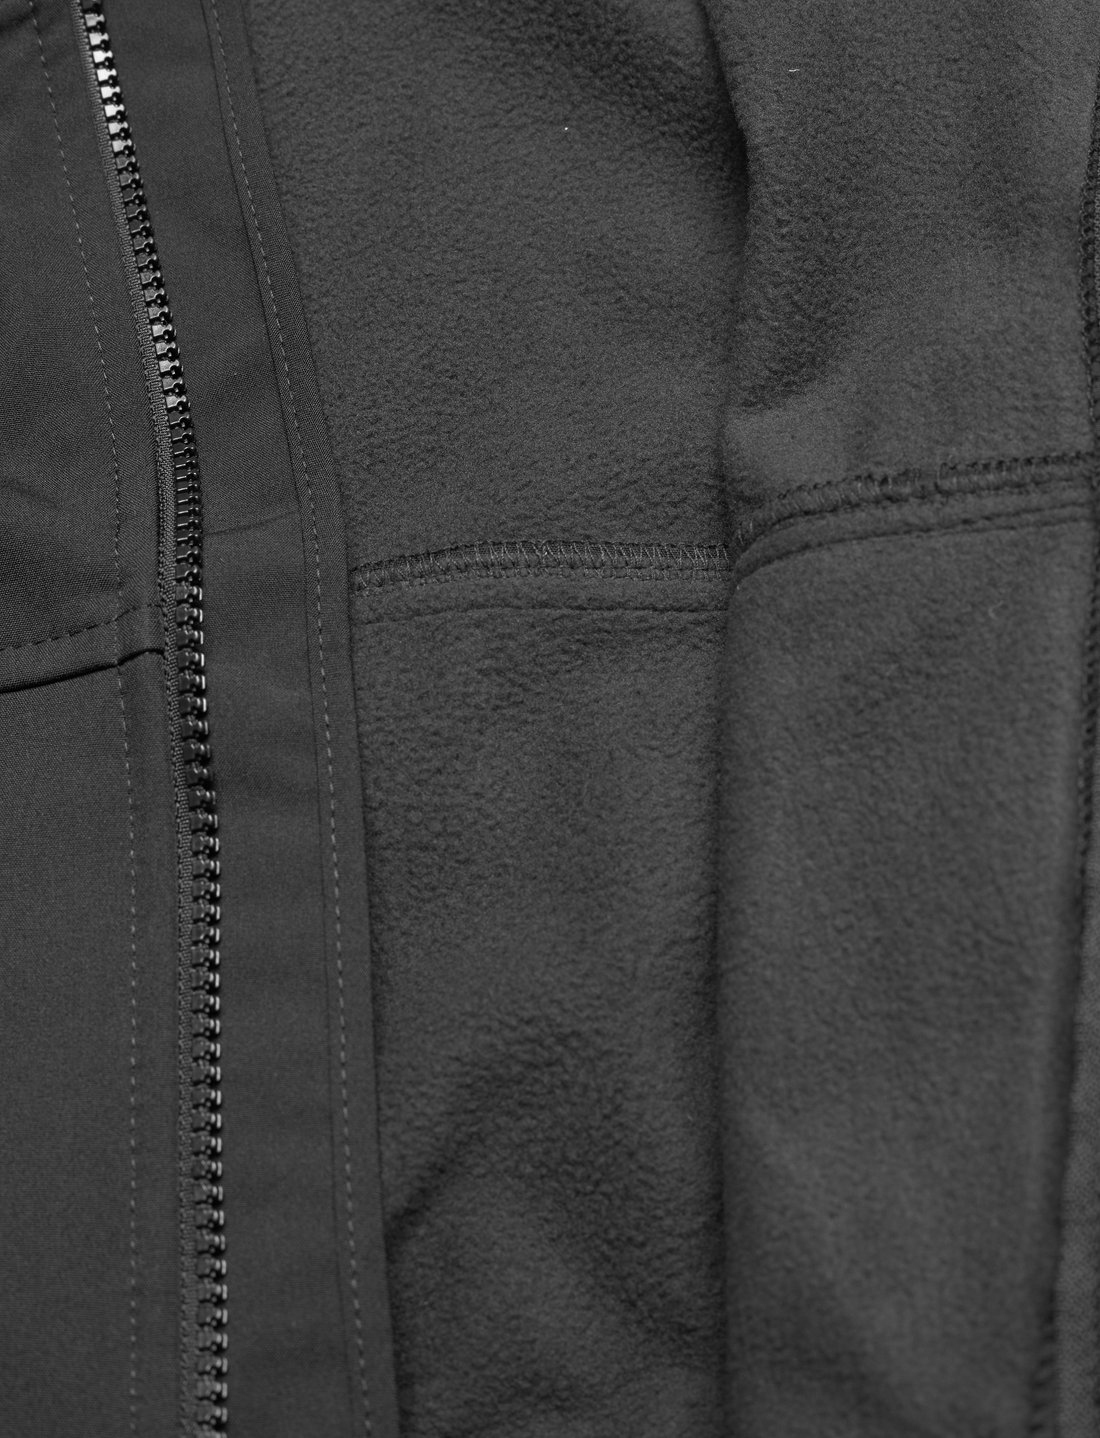 name it Nmmalfa08 Jacket Badge Fo - 22.50 €. Buy Jackets from name it  online at Boozt.com. Fast delivery and easy returns